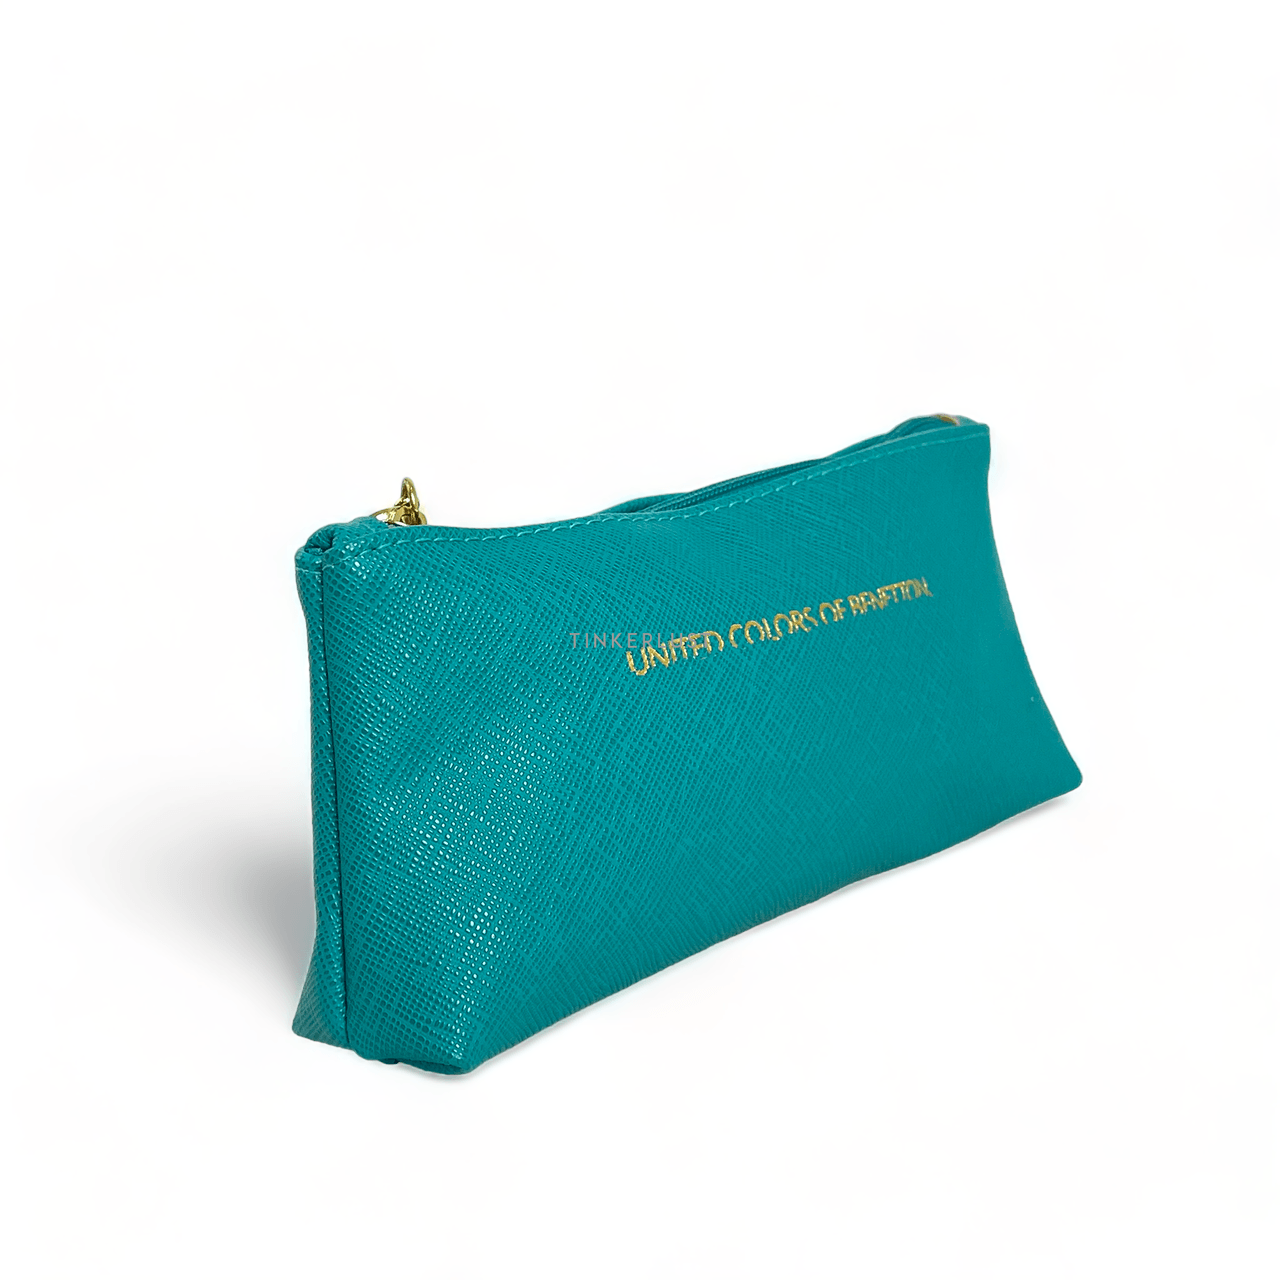 United Colors Of Benetton Tosca Pouch